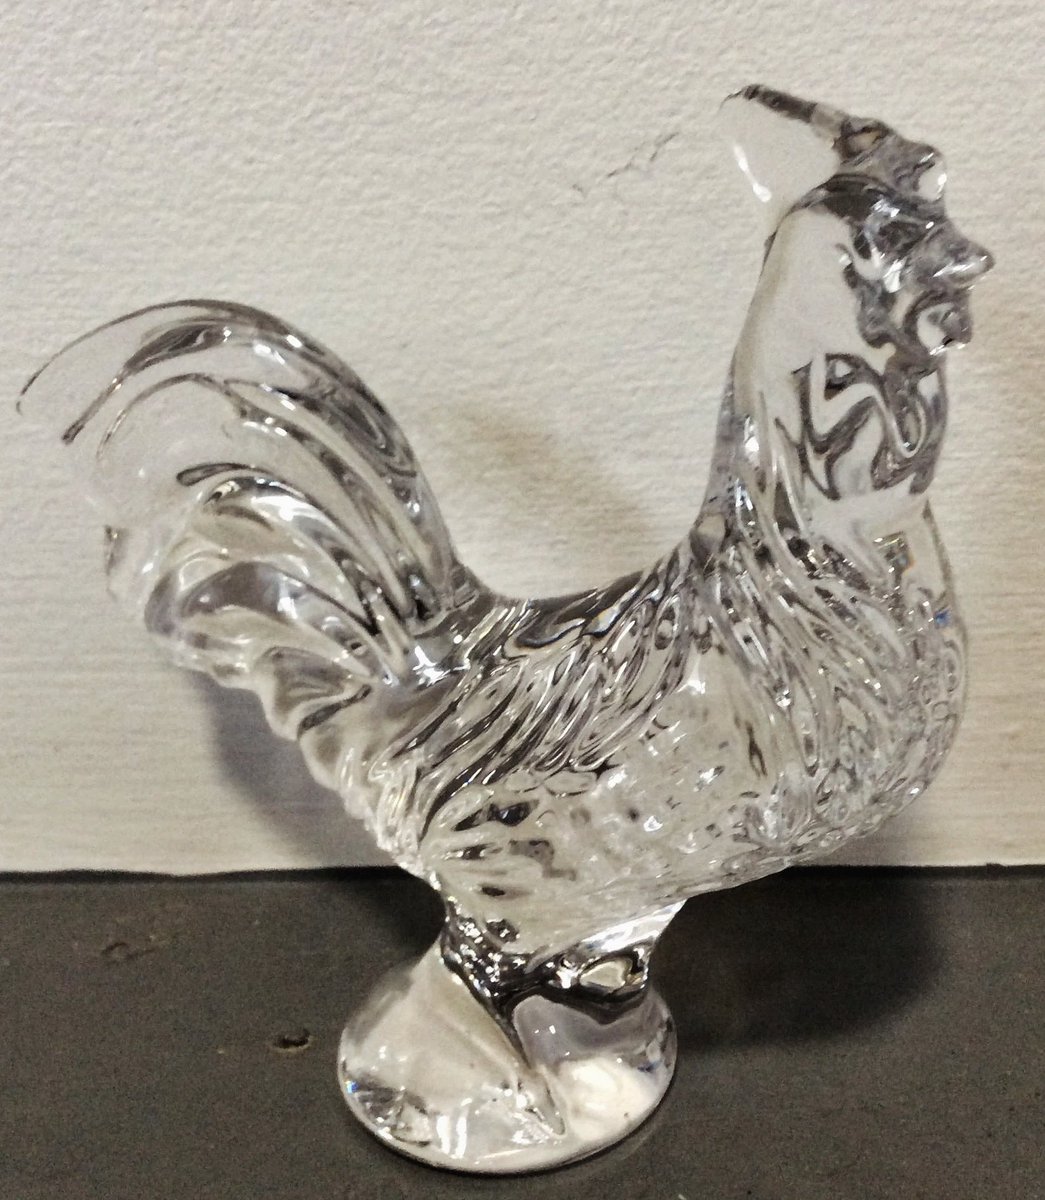 CA$40.00
Vintage #Cockerel #roosters #paperweights #glassrooster #farmhouse #chick from
VintageVigo #etsy #etsycanada #etsyvintage #vintagedecor #gothicdecor #movieprops #setdesign #housestaging #housestaging 
etsy.com/ca/listing/171…